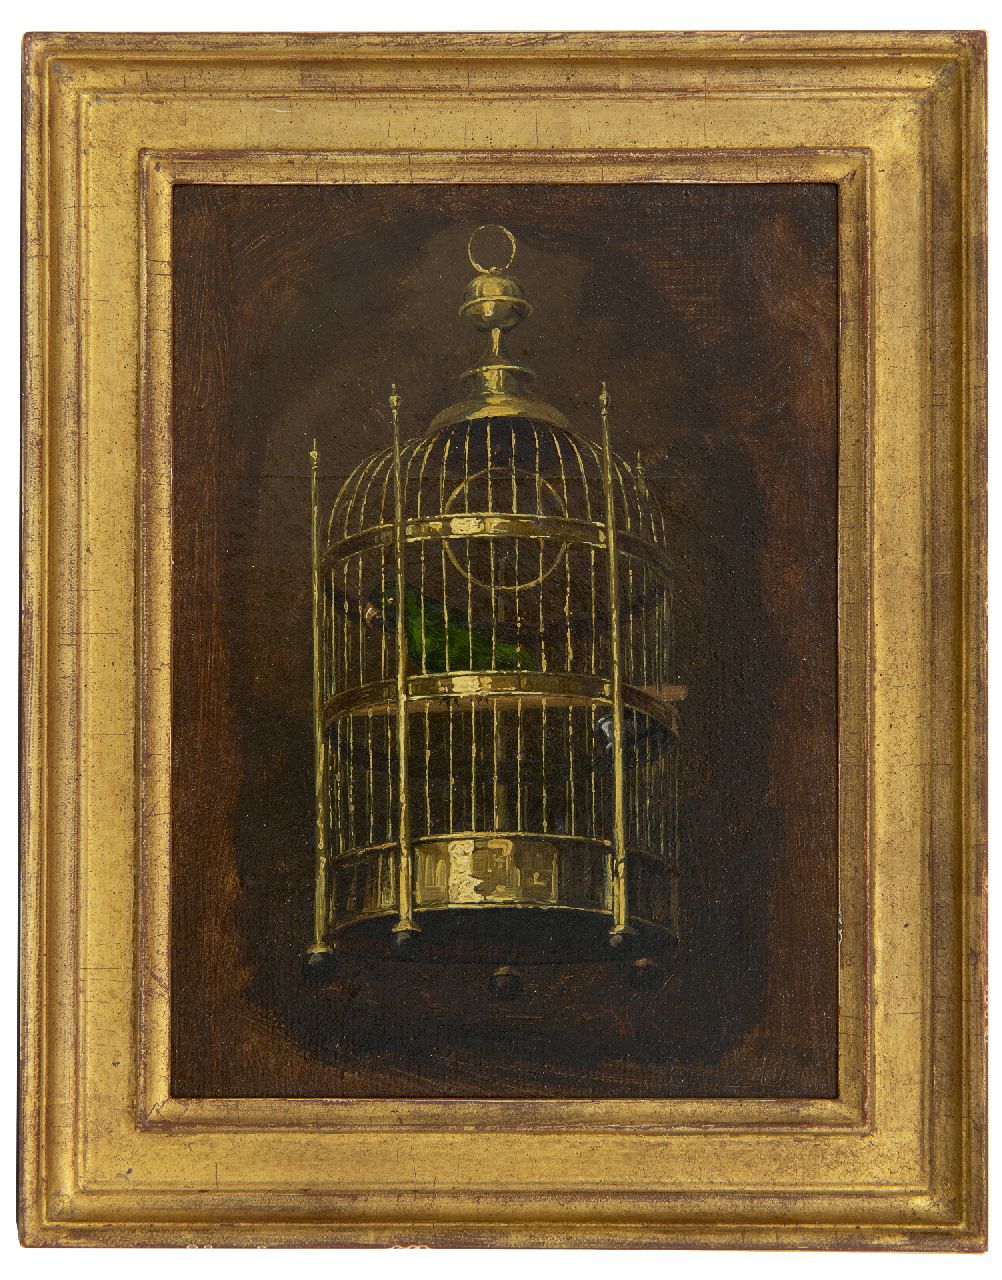 Savrij H.  | Hendrik Savrij | Paintings offered for sale | The parrot cage, oil on canvas laid down on panel 22.1 x 16.1 cm, signed l.r.